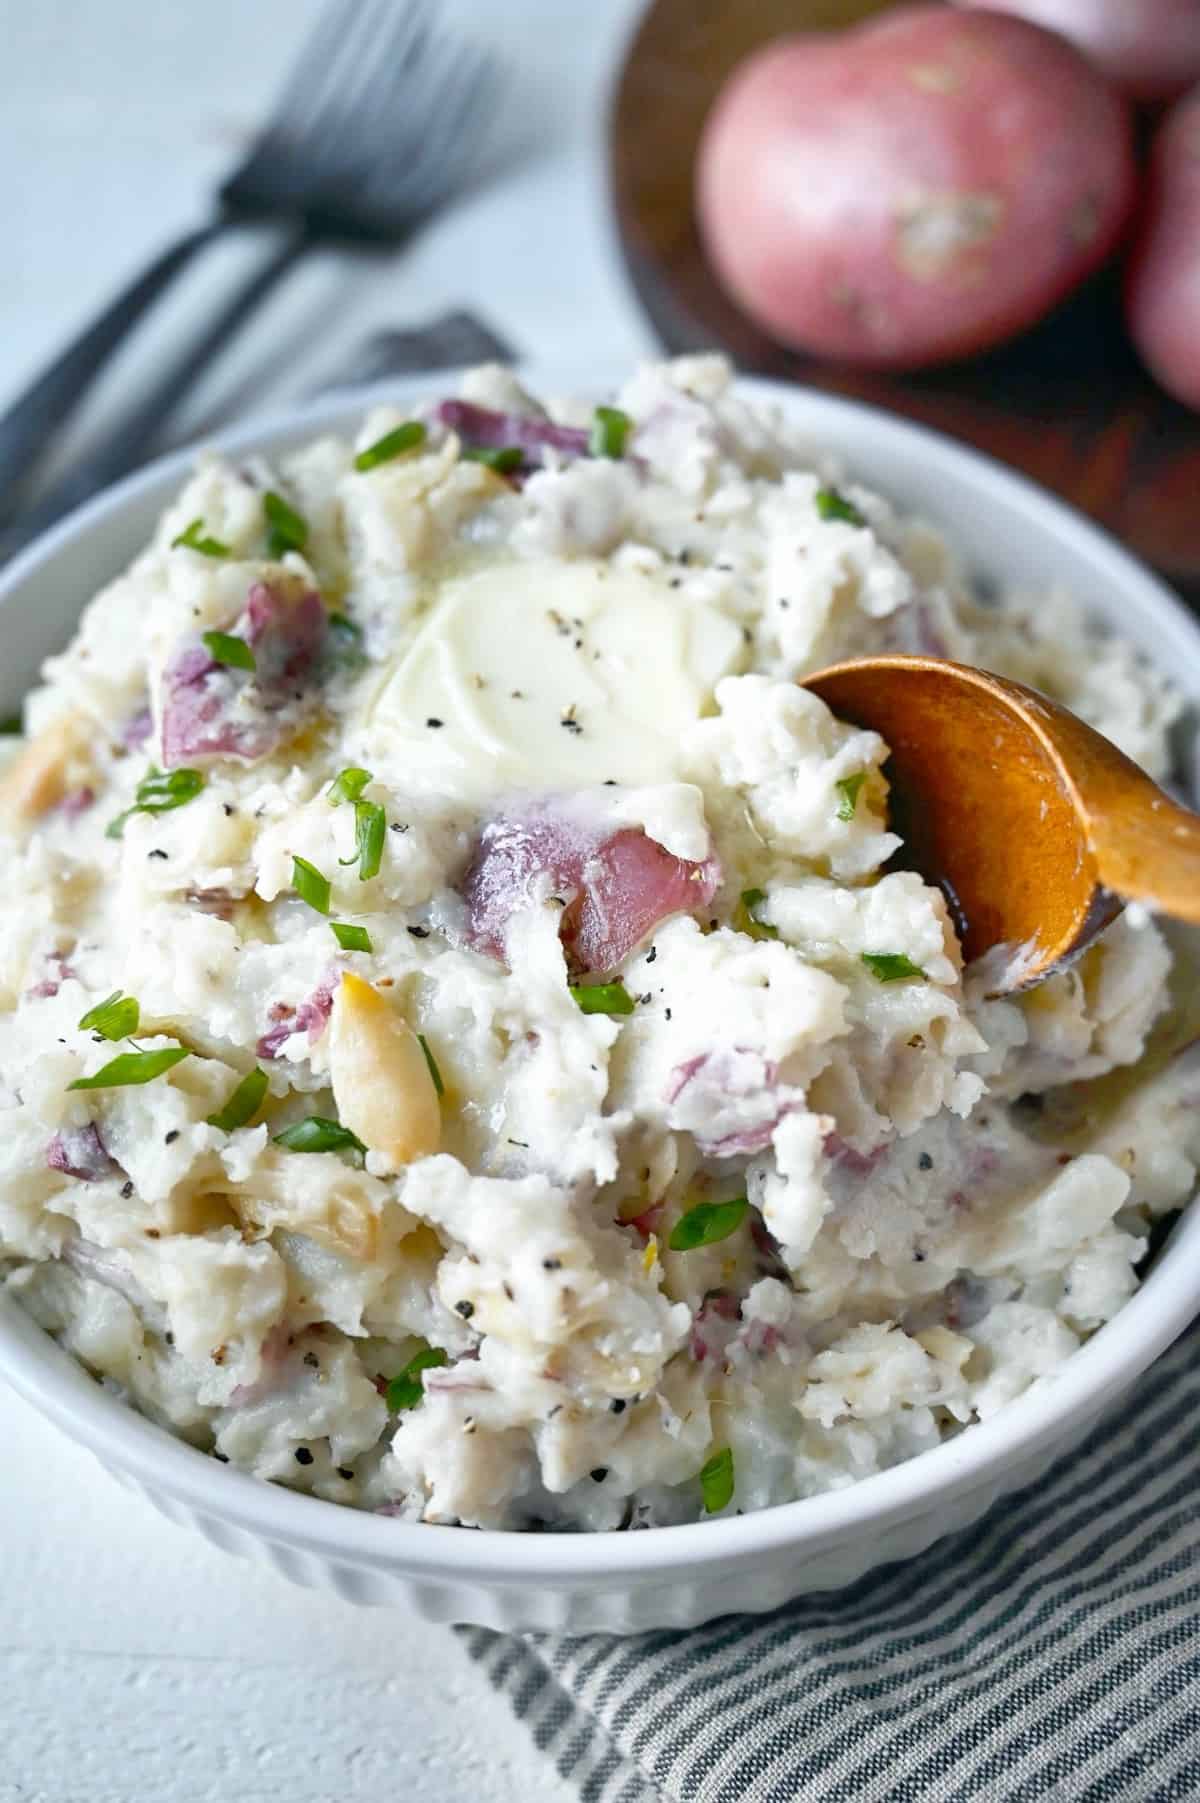 A bowl of mashed red potatoes with a wooden spoon.